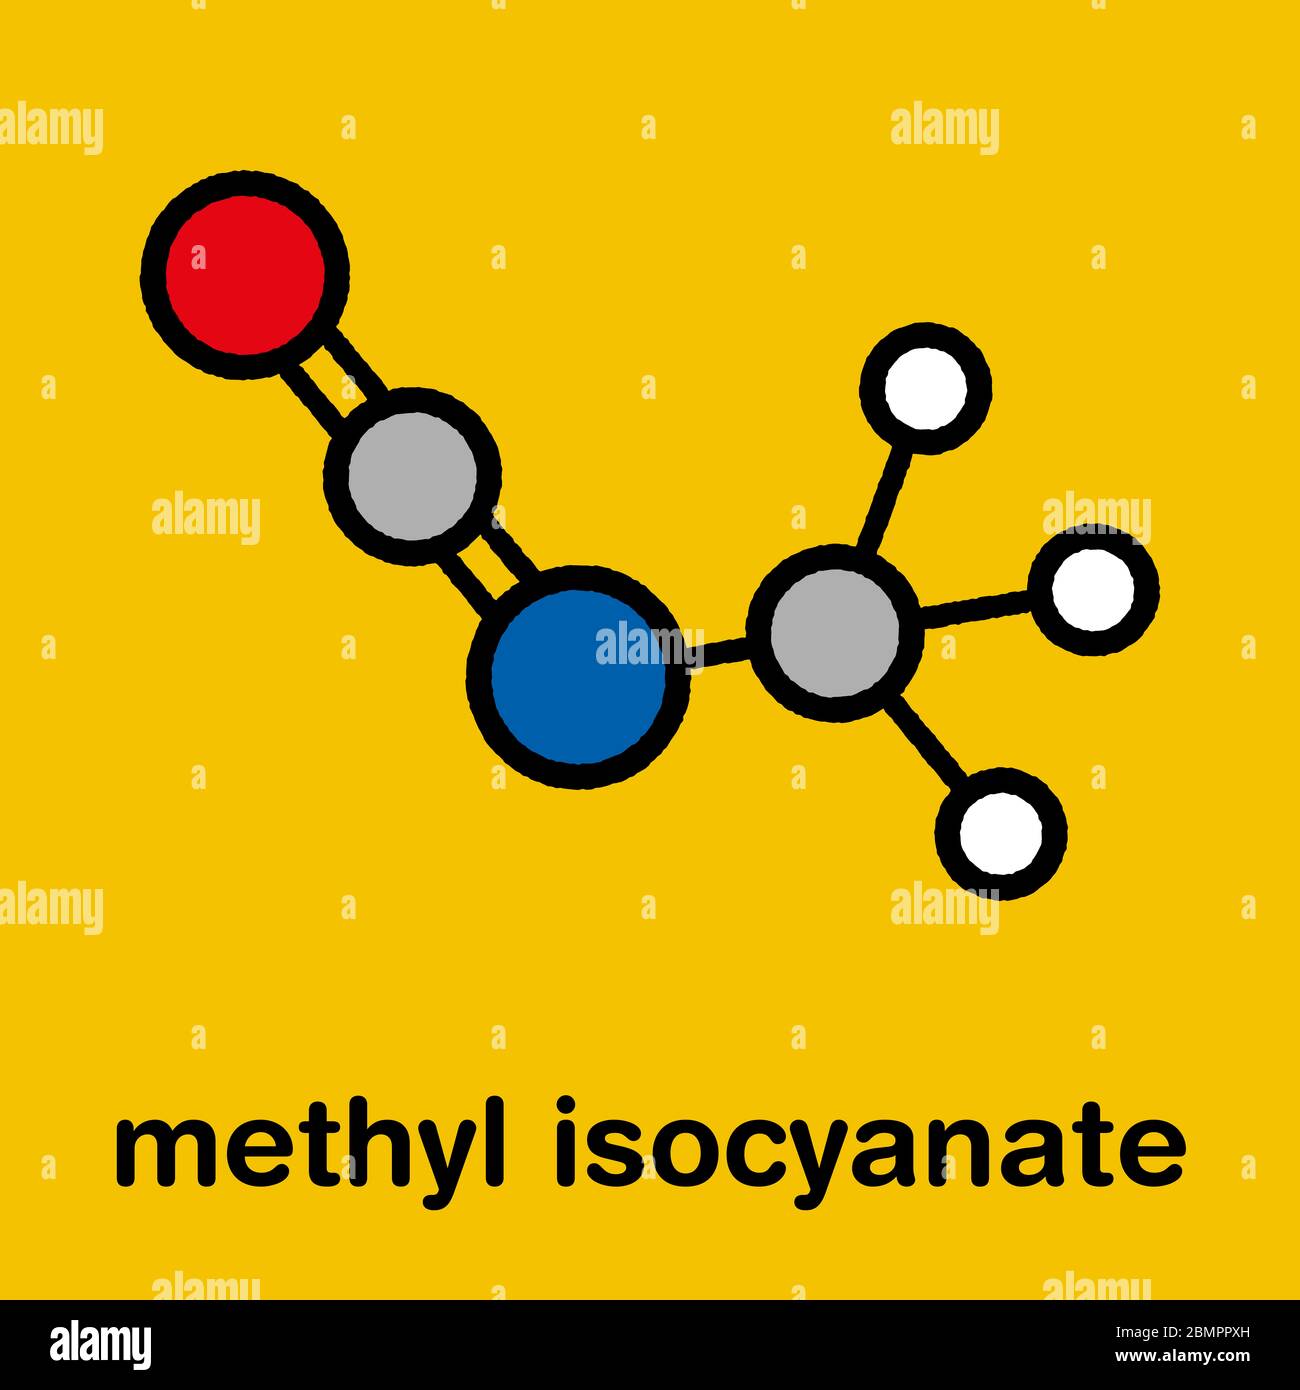 Methyl isocyanate (MIC) toxic molecule. Important chemical that was responsible for thousands of deaths in the Bhopal disaster. Stylized skeletal formula (chemical structure): Atoms are shown as color-coded circles: hydrogen (white), carbon (grey), oxygen (red), nitrogen (blue). Stock Photo